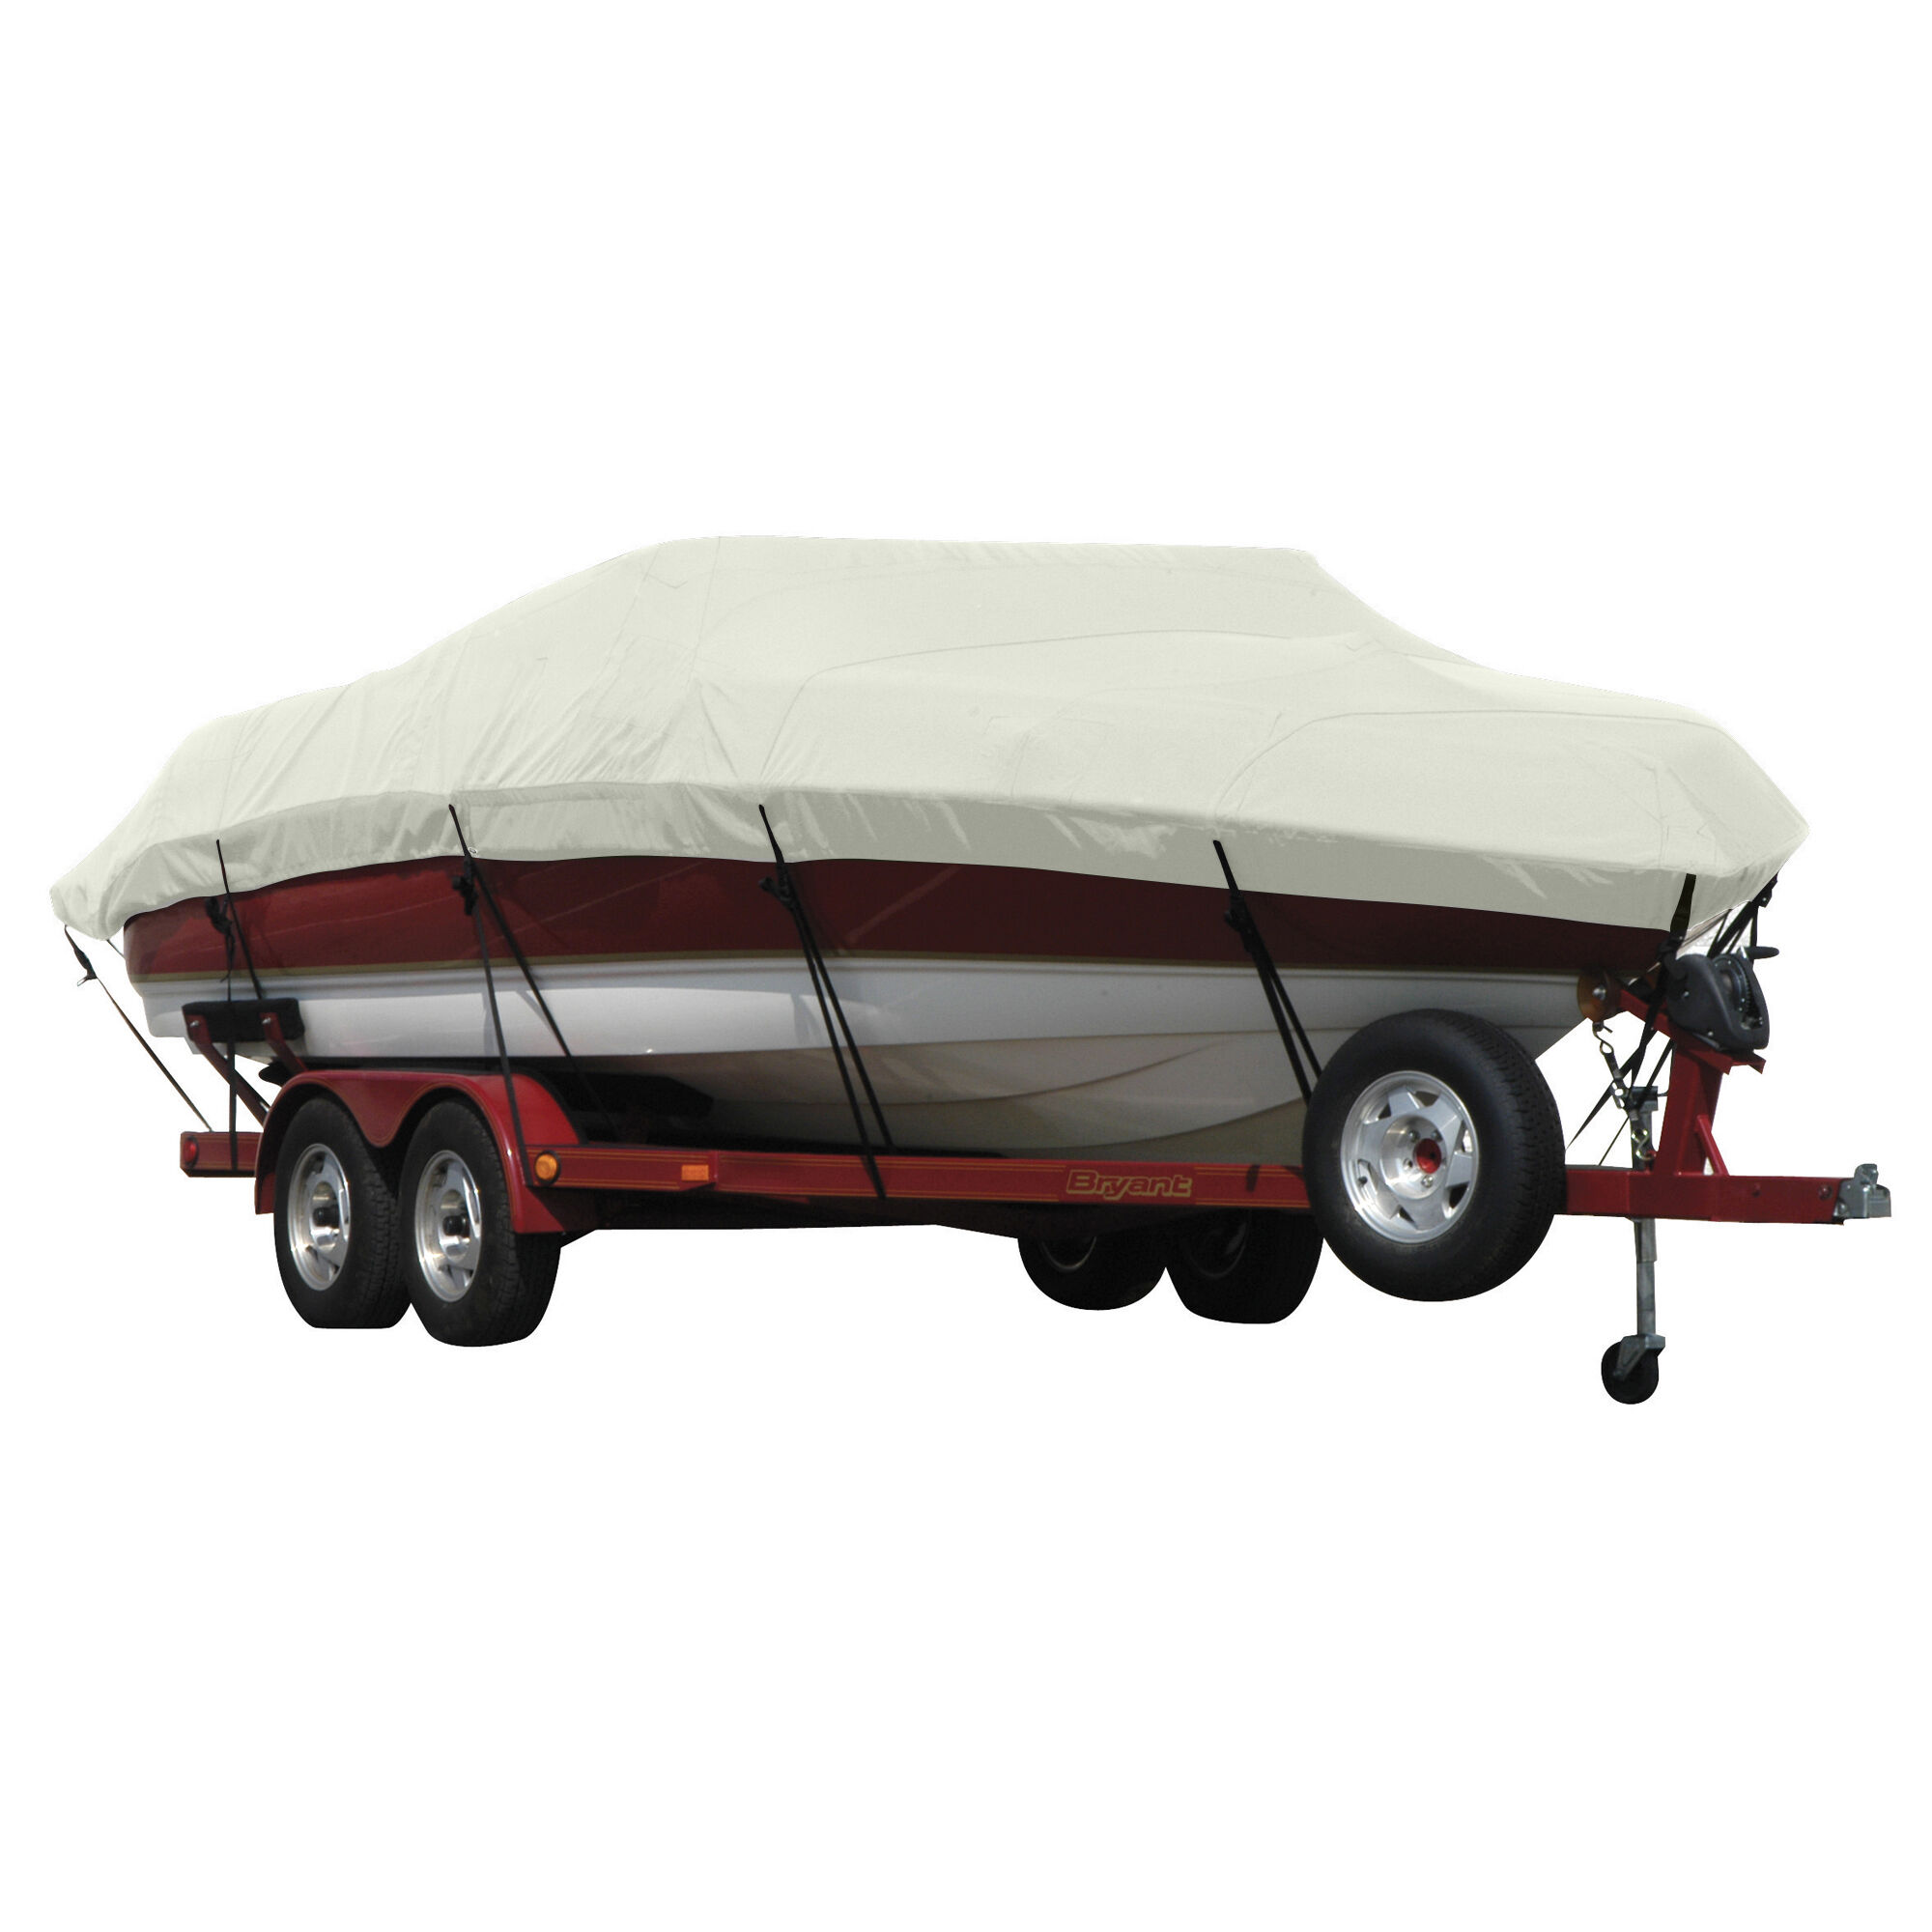 Covermate Exact Fit Sunbrella Boat Cover for Commander Party Cat 28 Party Cat 28 I/O. Silver Acrylic